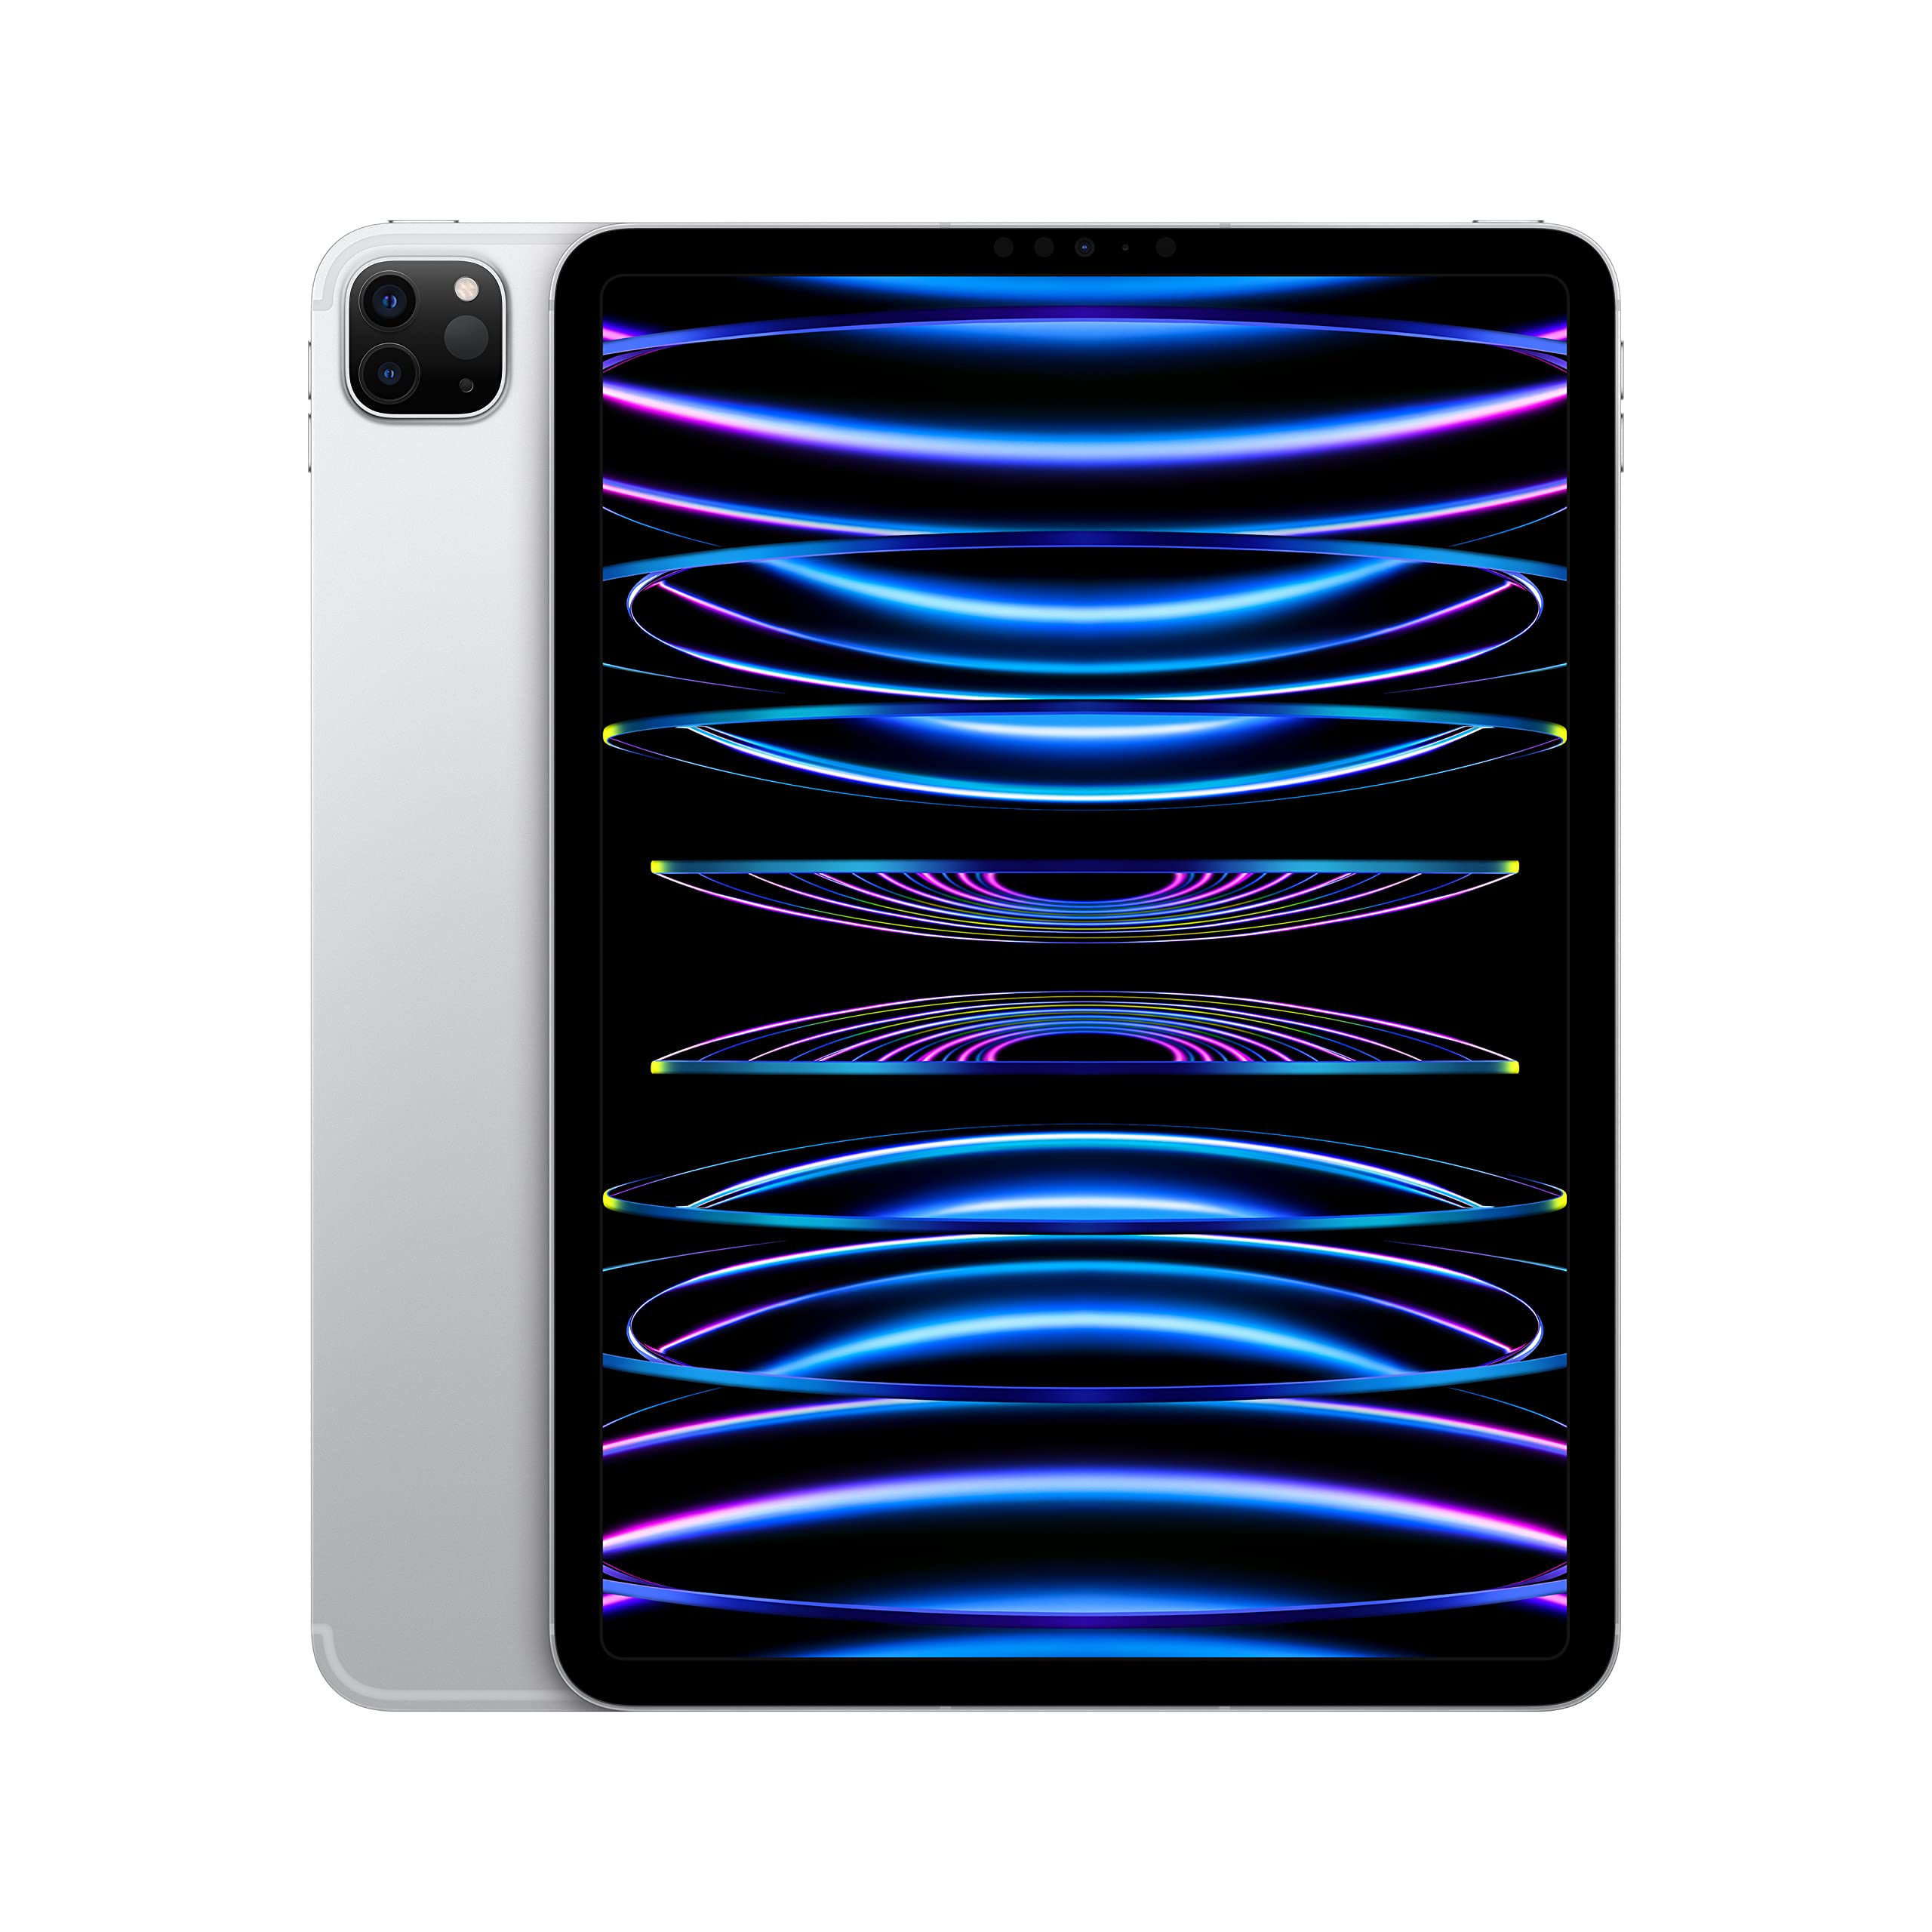 Apple iPad Pro 11-inch (4th Generation): with M2 chip, Liquid Retina Display, 128GB, Wi-Fi 6E + 5G Cellular, 12MP front/12MP and 10MP Back Cameras, Face ID, All-Day Battery Life – Silver